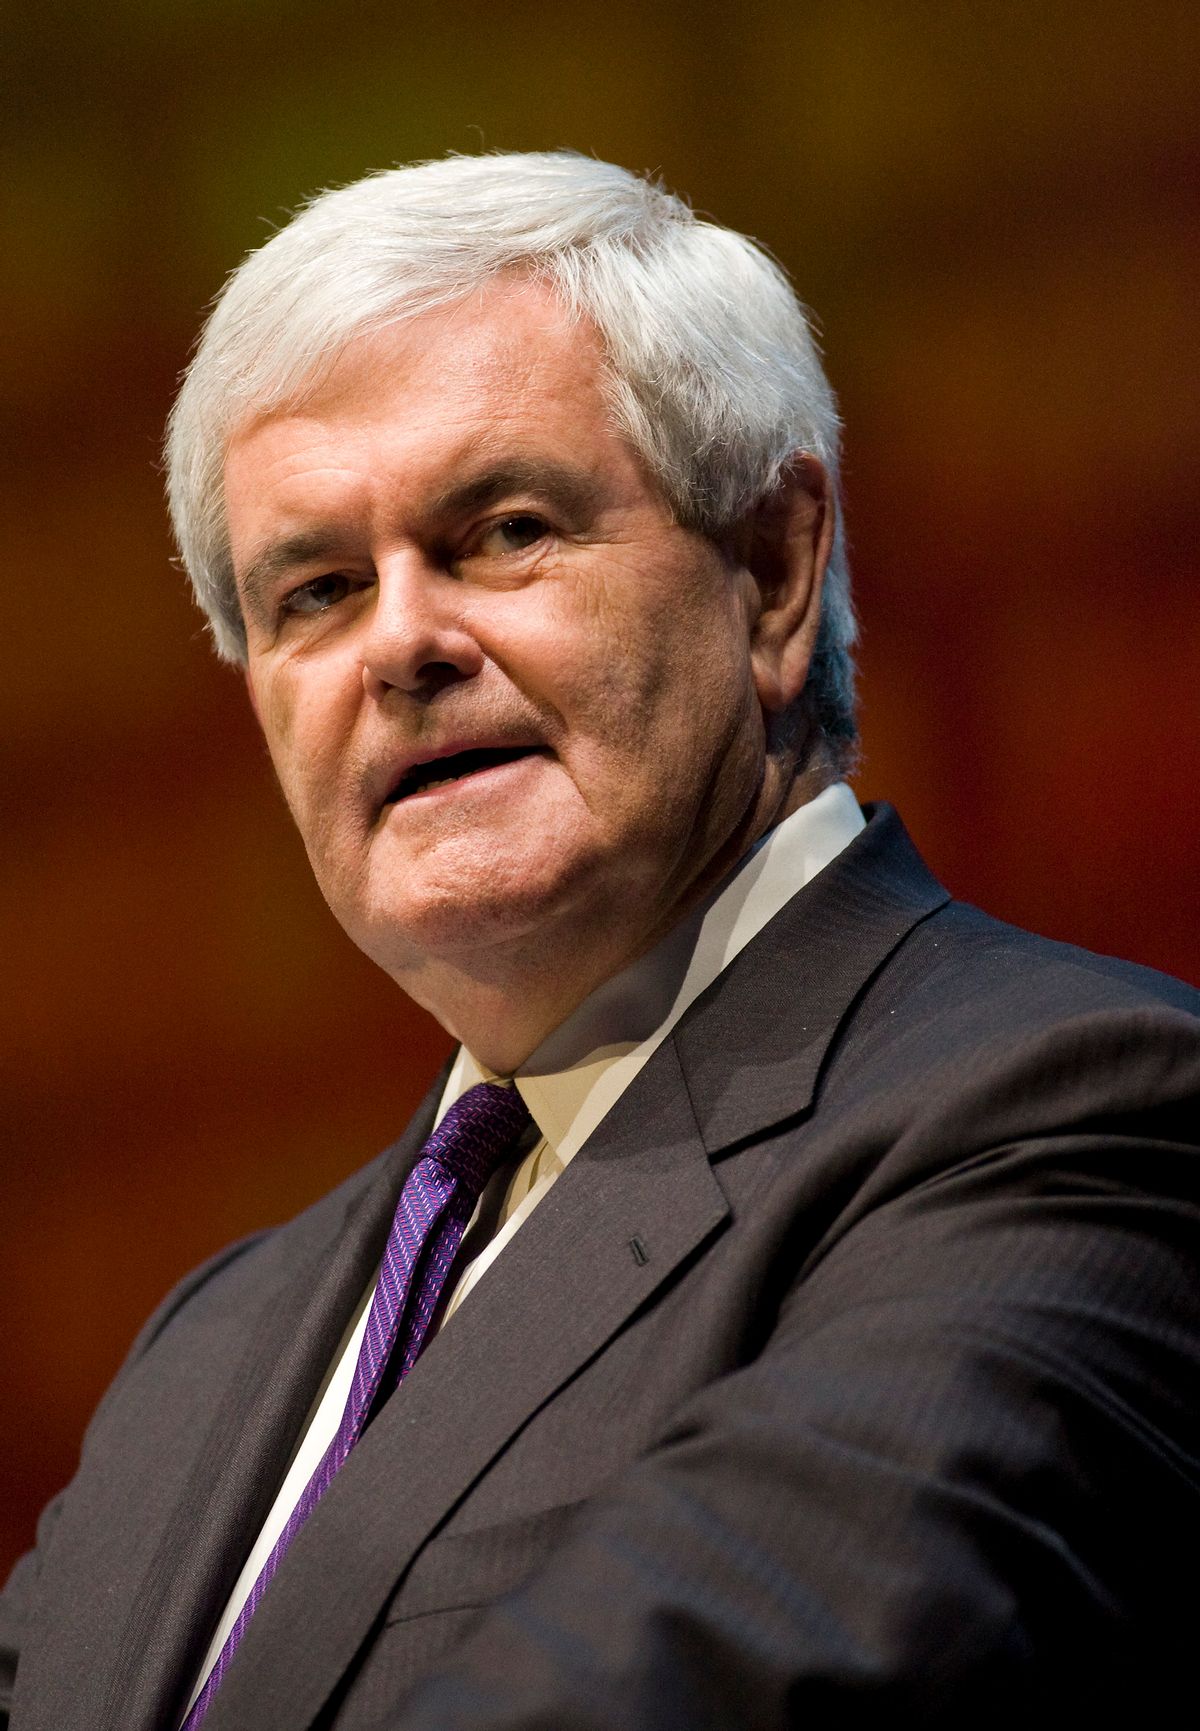 Former Speaker of the House Newt Gingrich speaks during the National Rifle Association's 139th annual meeting in Charlotte, North Carolina on May 15, 2010. REUTERS/Chris Keane (UNITED STATES - Tags: POLITICS) (Reuters)